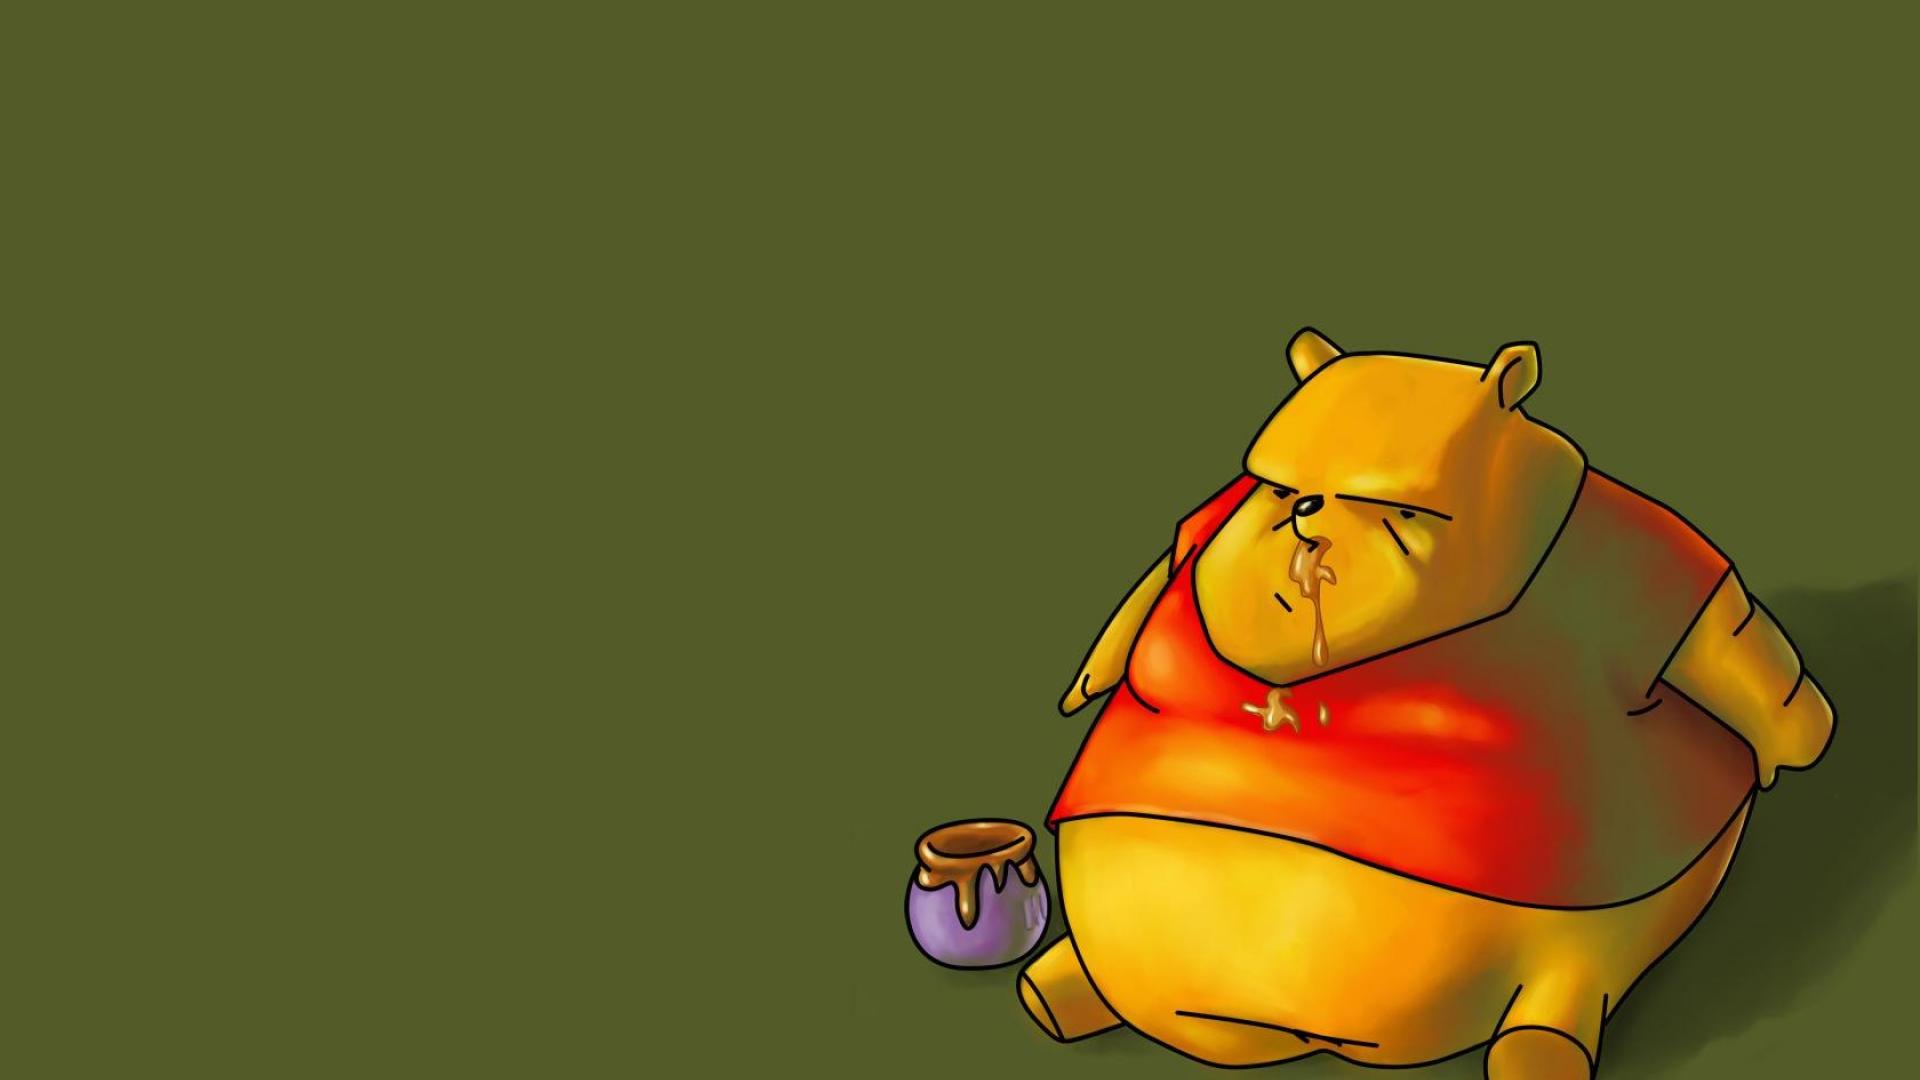 Fat vinnie the pooh whinny funny humor art HD Wallpaper wallpaper